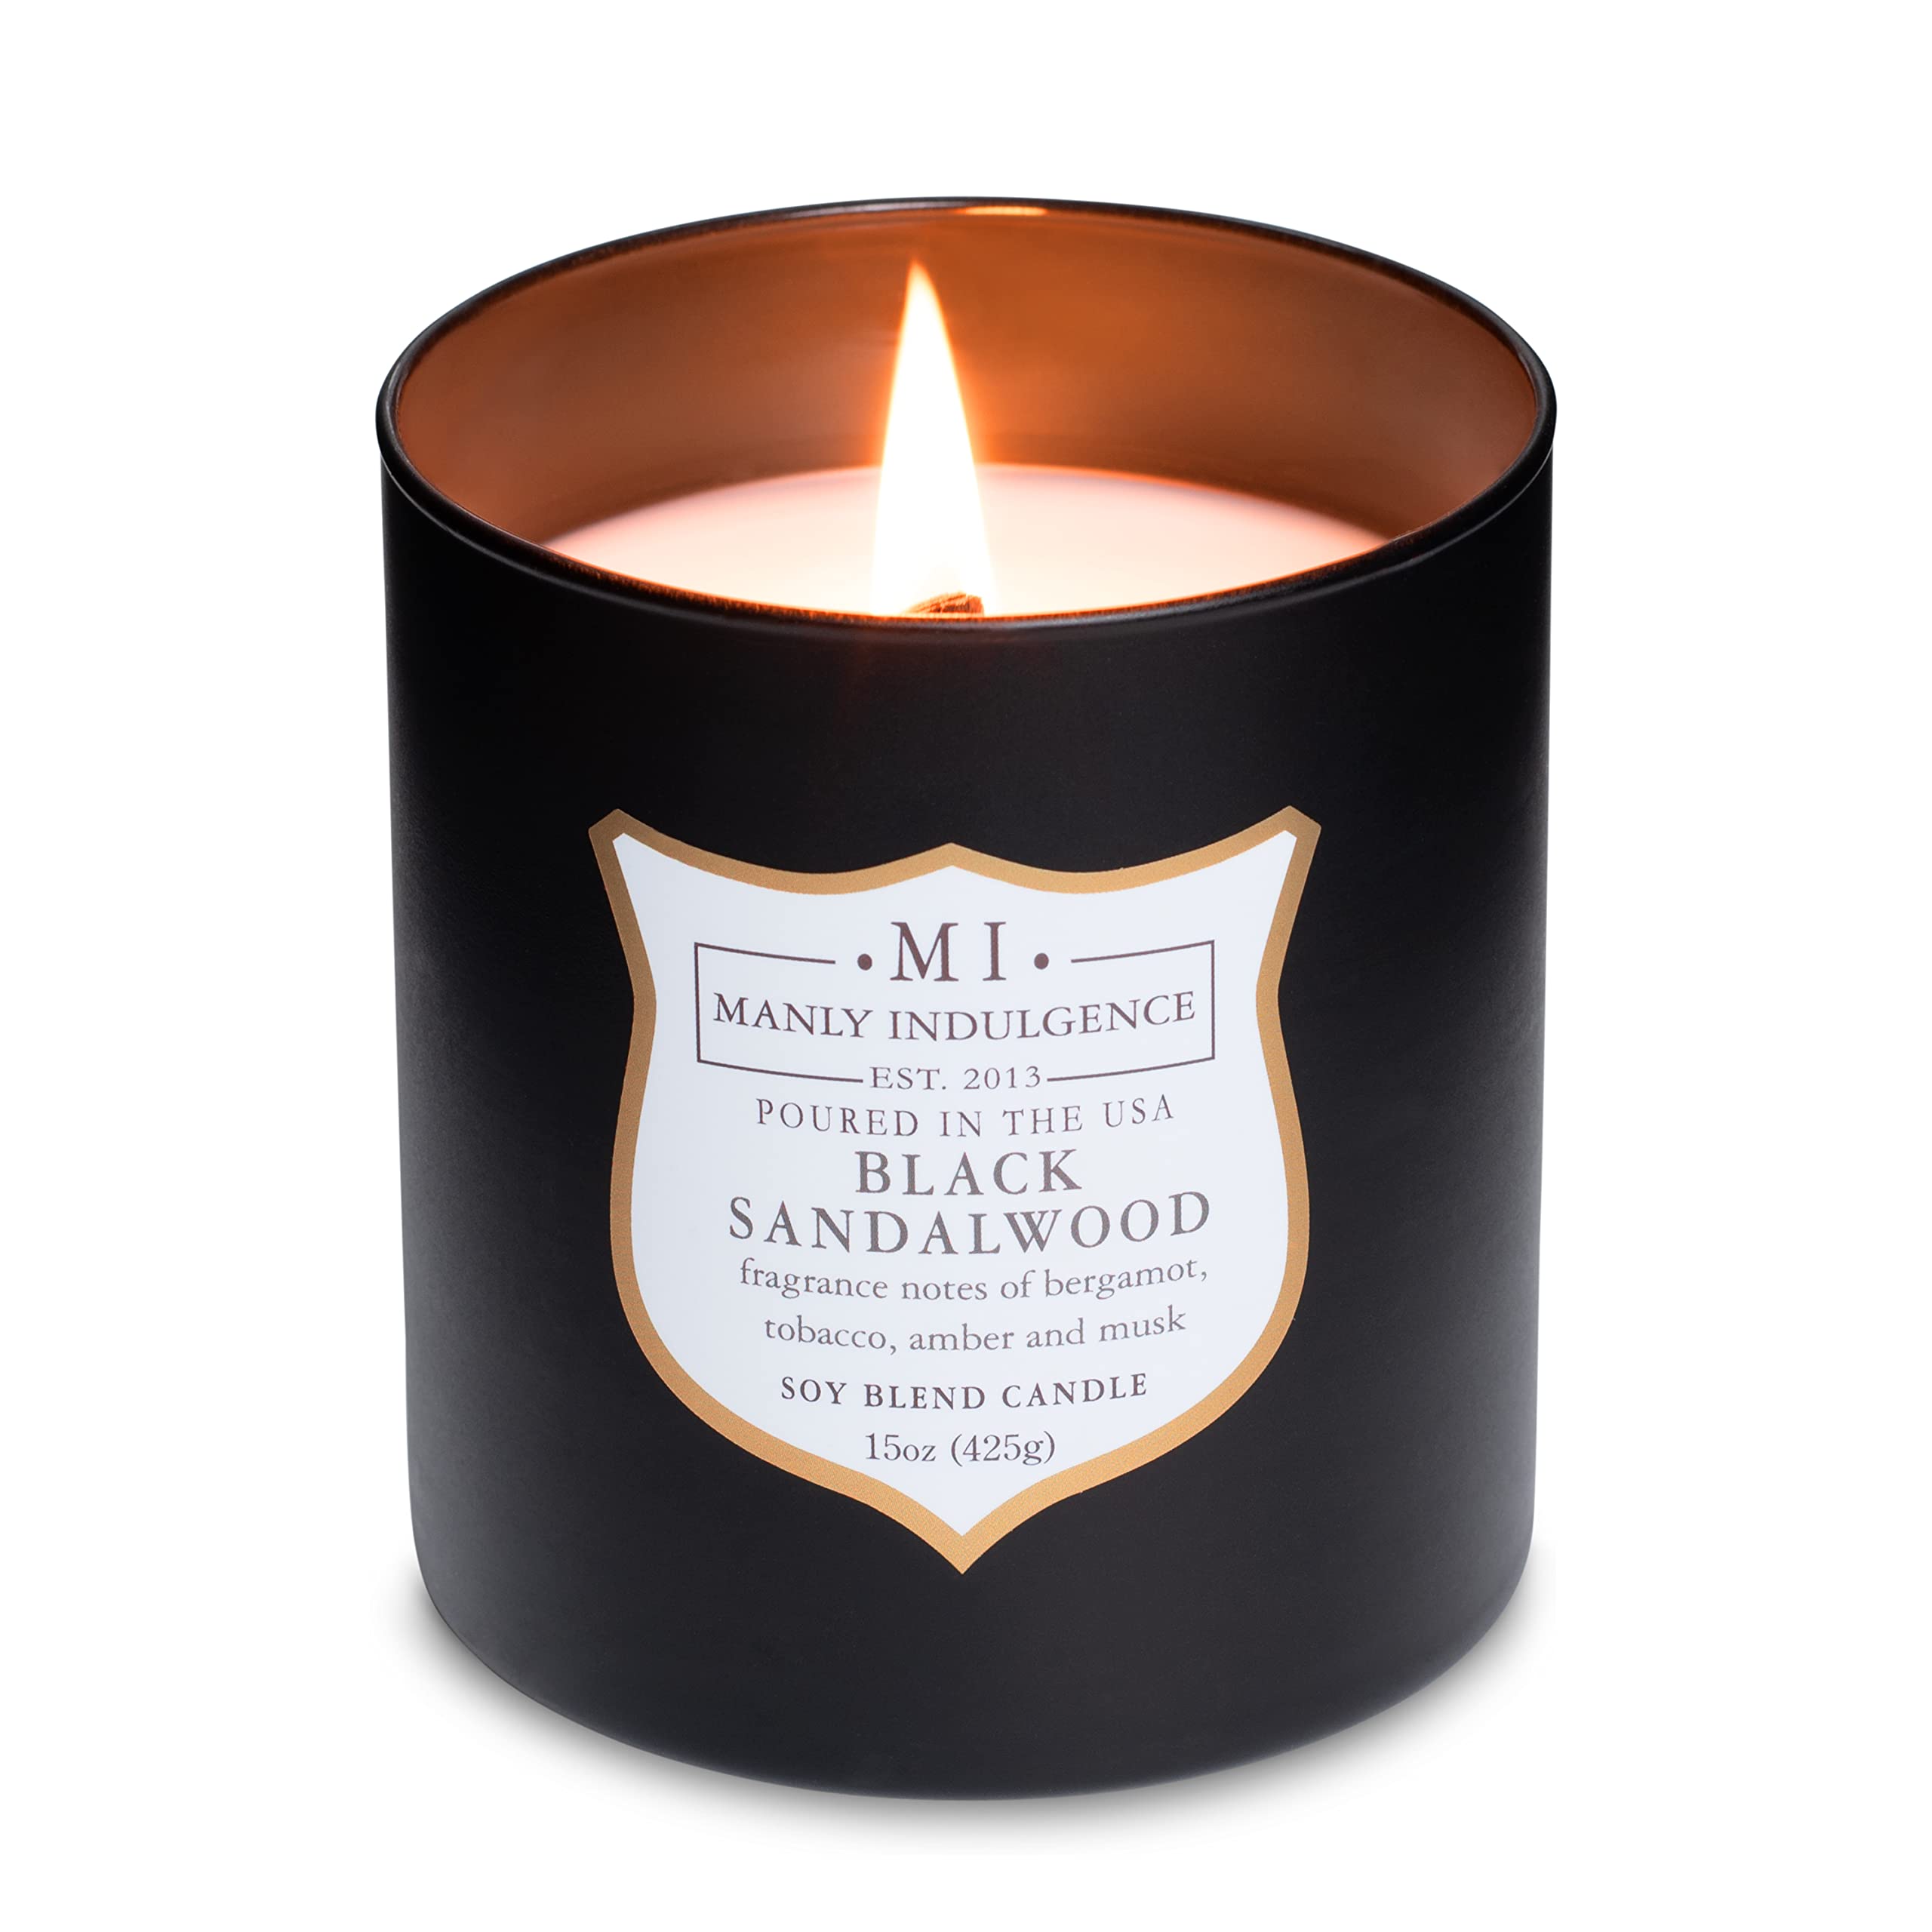 Manly Indulgence Scented Jar Candle, Black Sandalwood, Signature Collection, Soy Wax Blend, Wooden Wick, 15 Oz, Single (Bergamot, Tobacco, Amber & Musk)